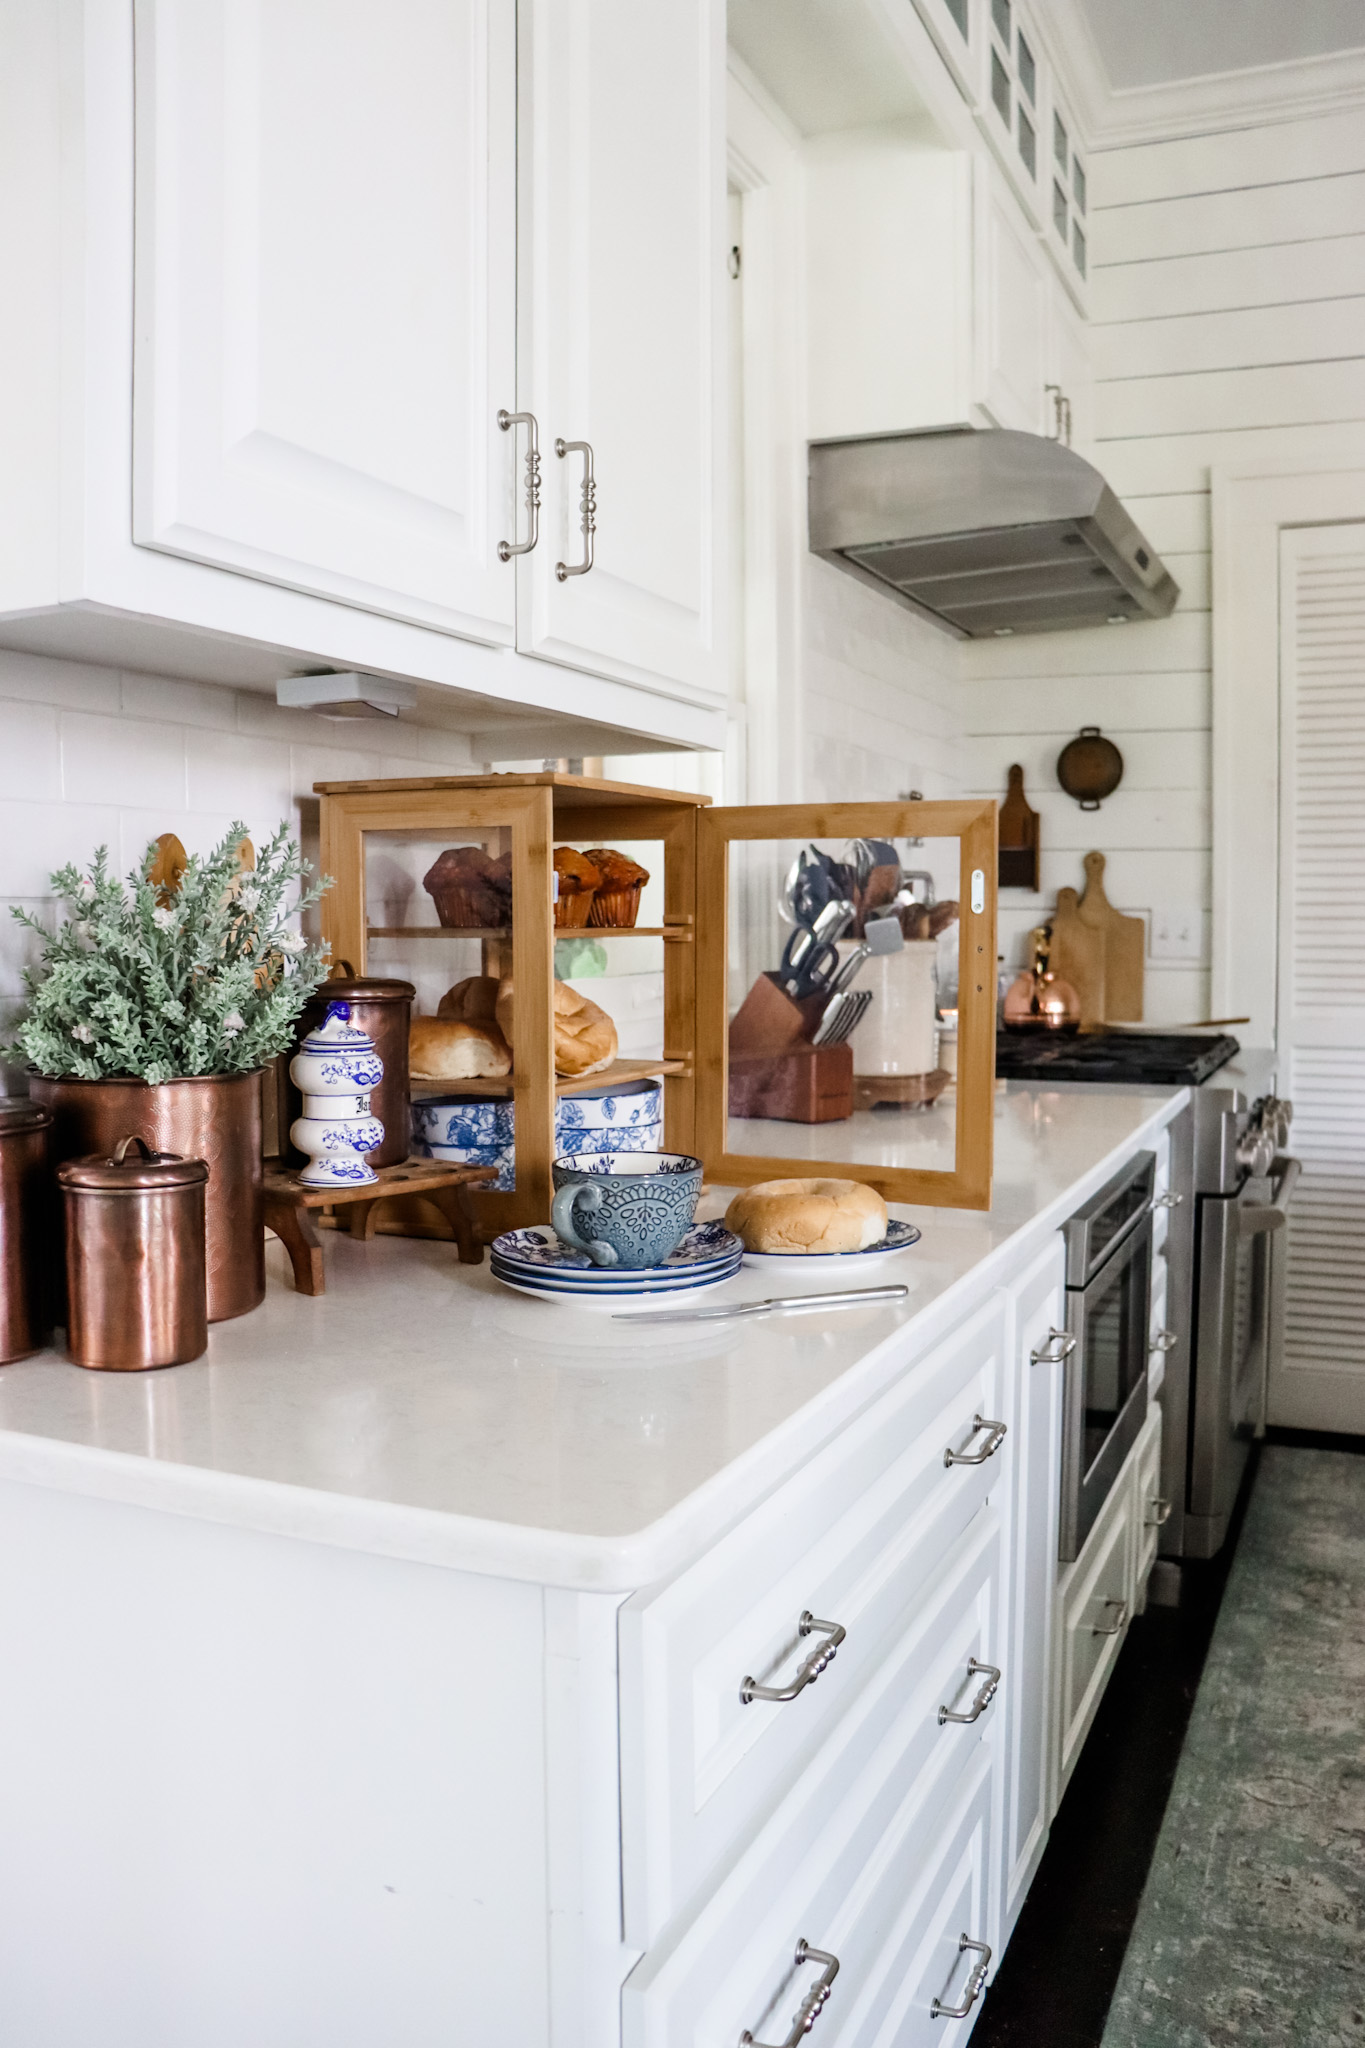 Copper canisters and a wood bread box pop against a cool white kitchen.